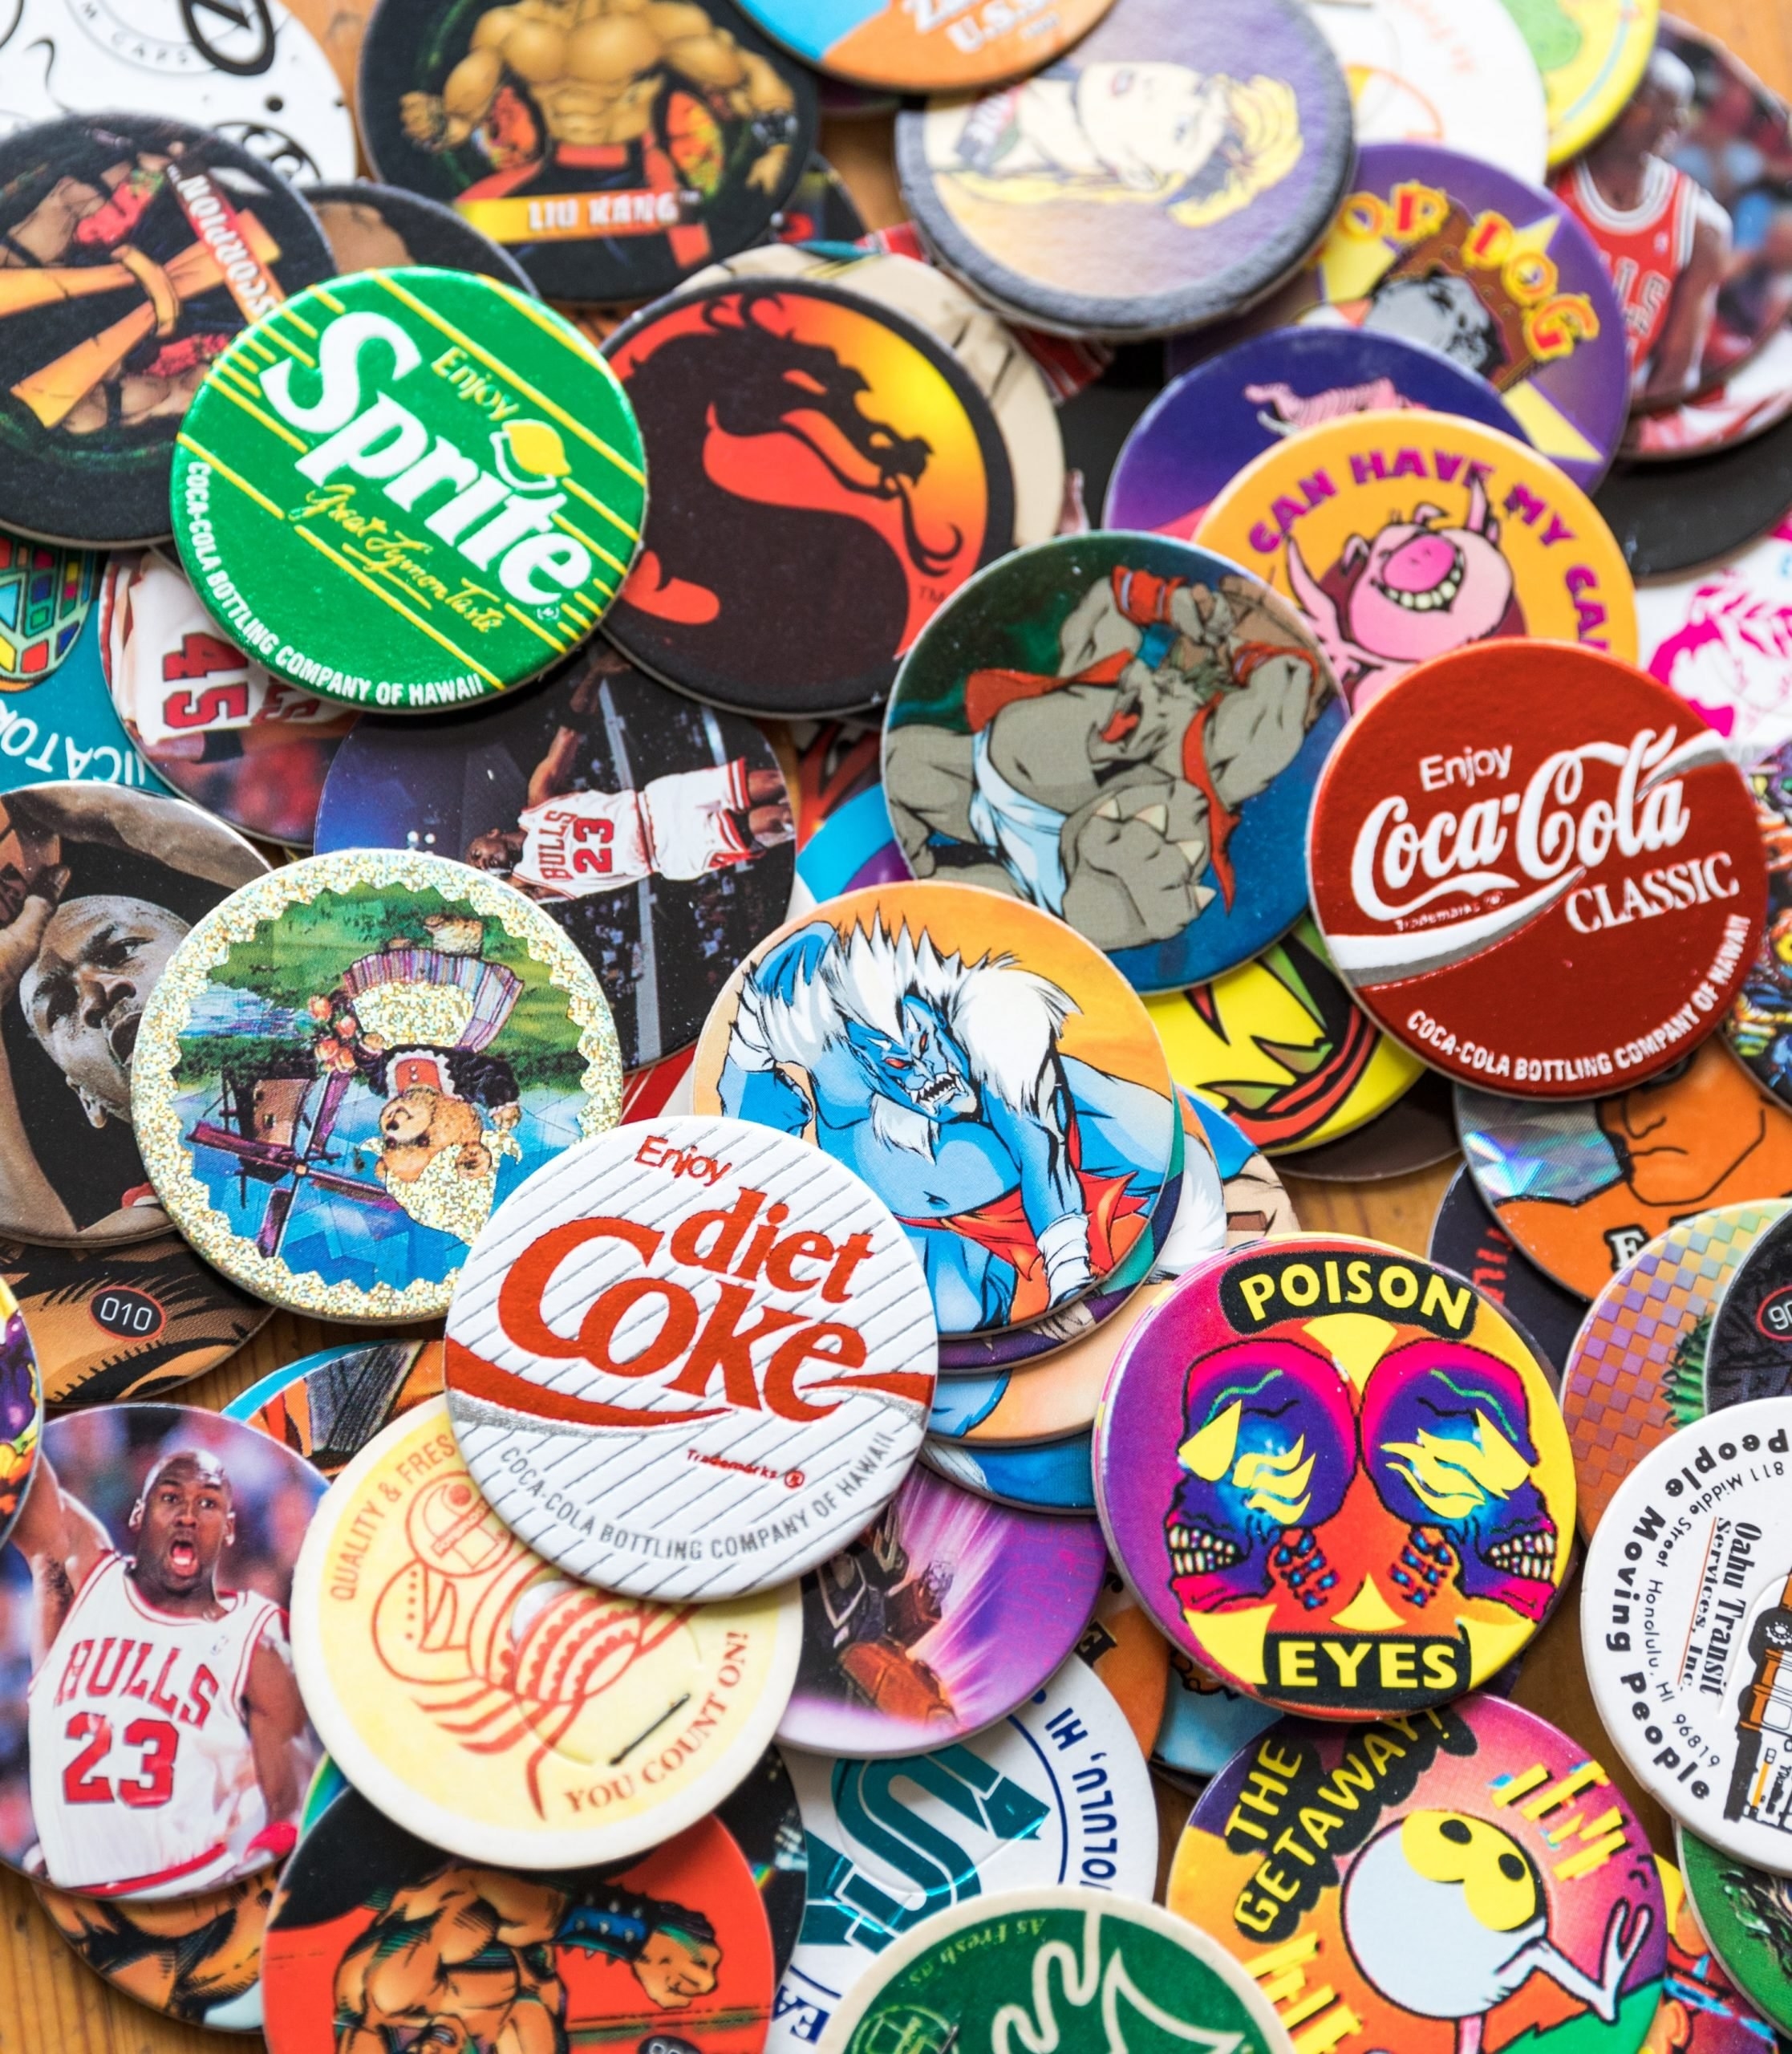 A huge pile of Pogs, including for Diet Coke, Coca-Cola Classic, Michael Jordan, and Poison Eyes